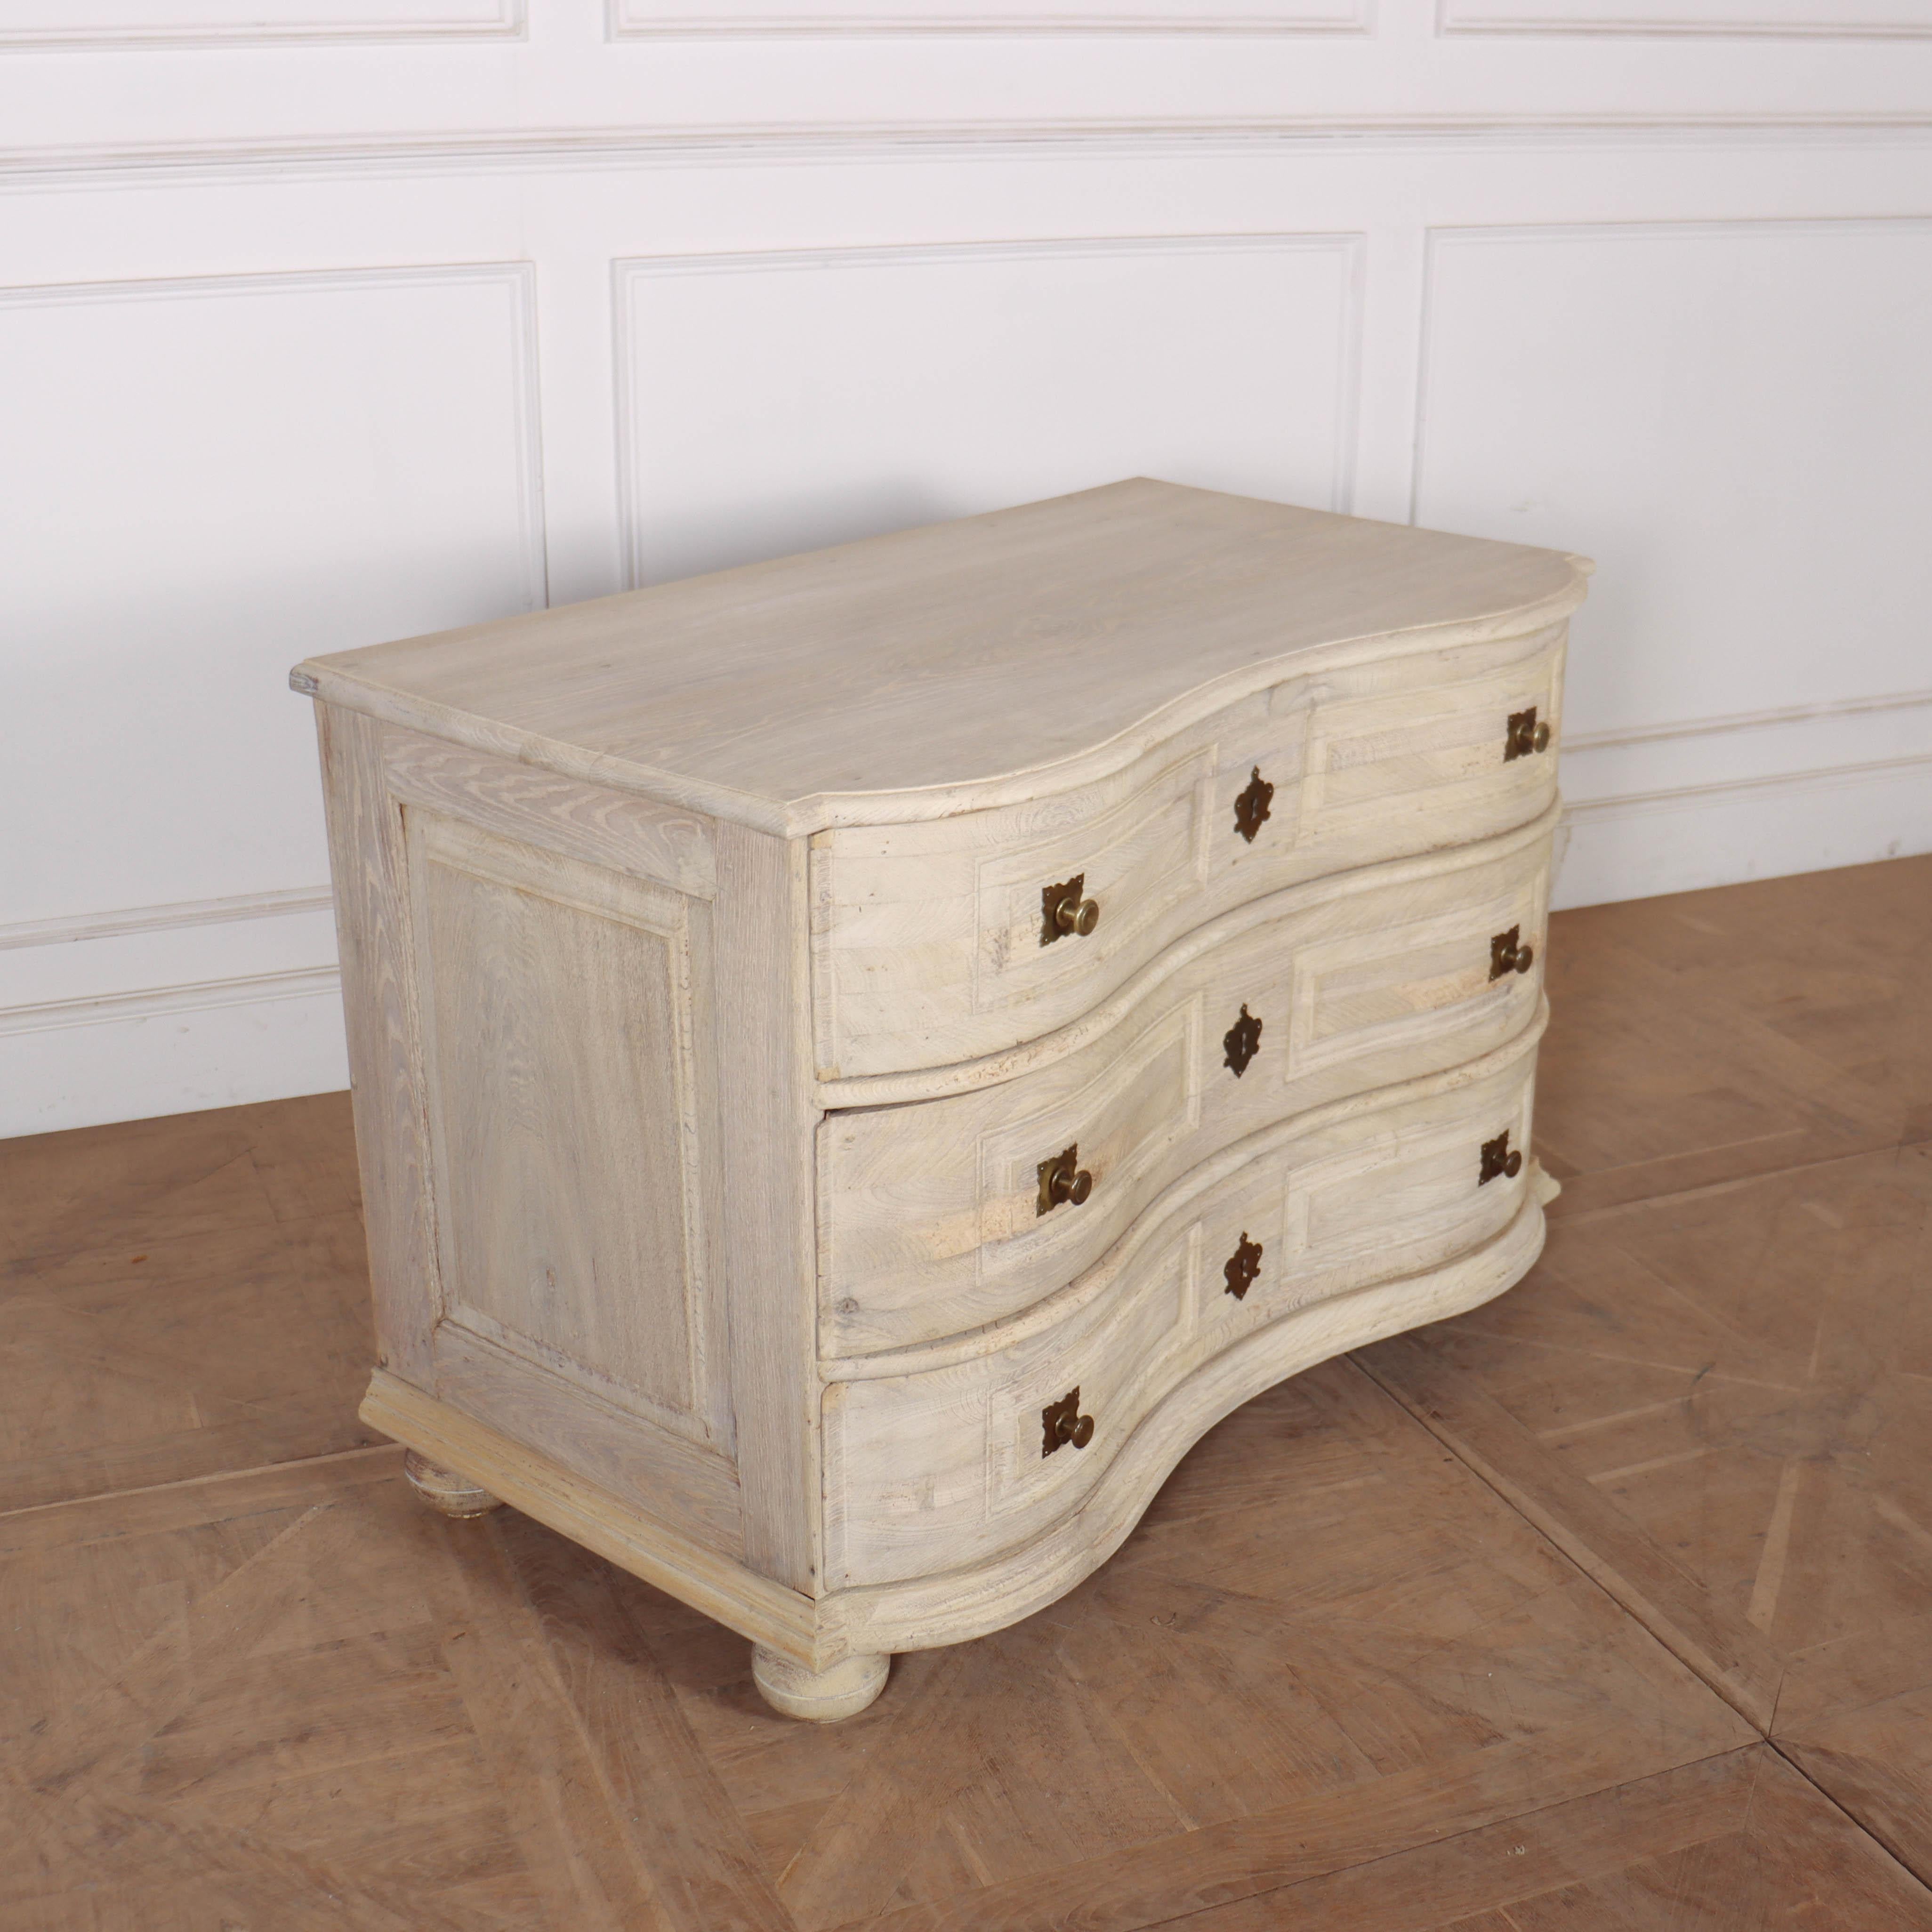 18th C Danish serpentine front 3 drawer bleached oak commode. 1760.

Reference: 7860

Dimensions
47 inches (119 cms) Wide
26.5 inches (67 cms) Deep
32.5 inches (83 cms) High.